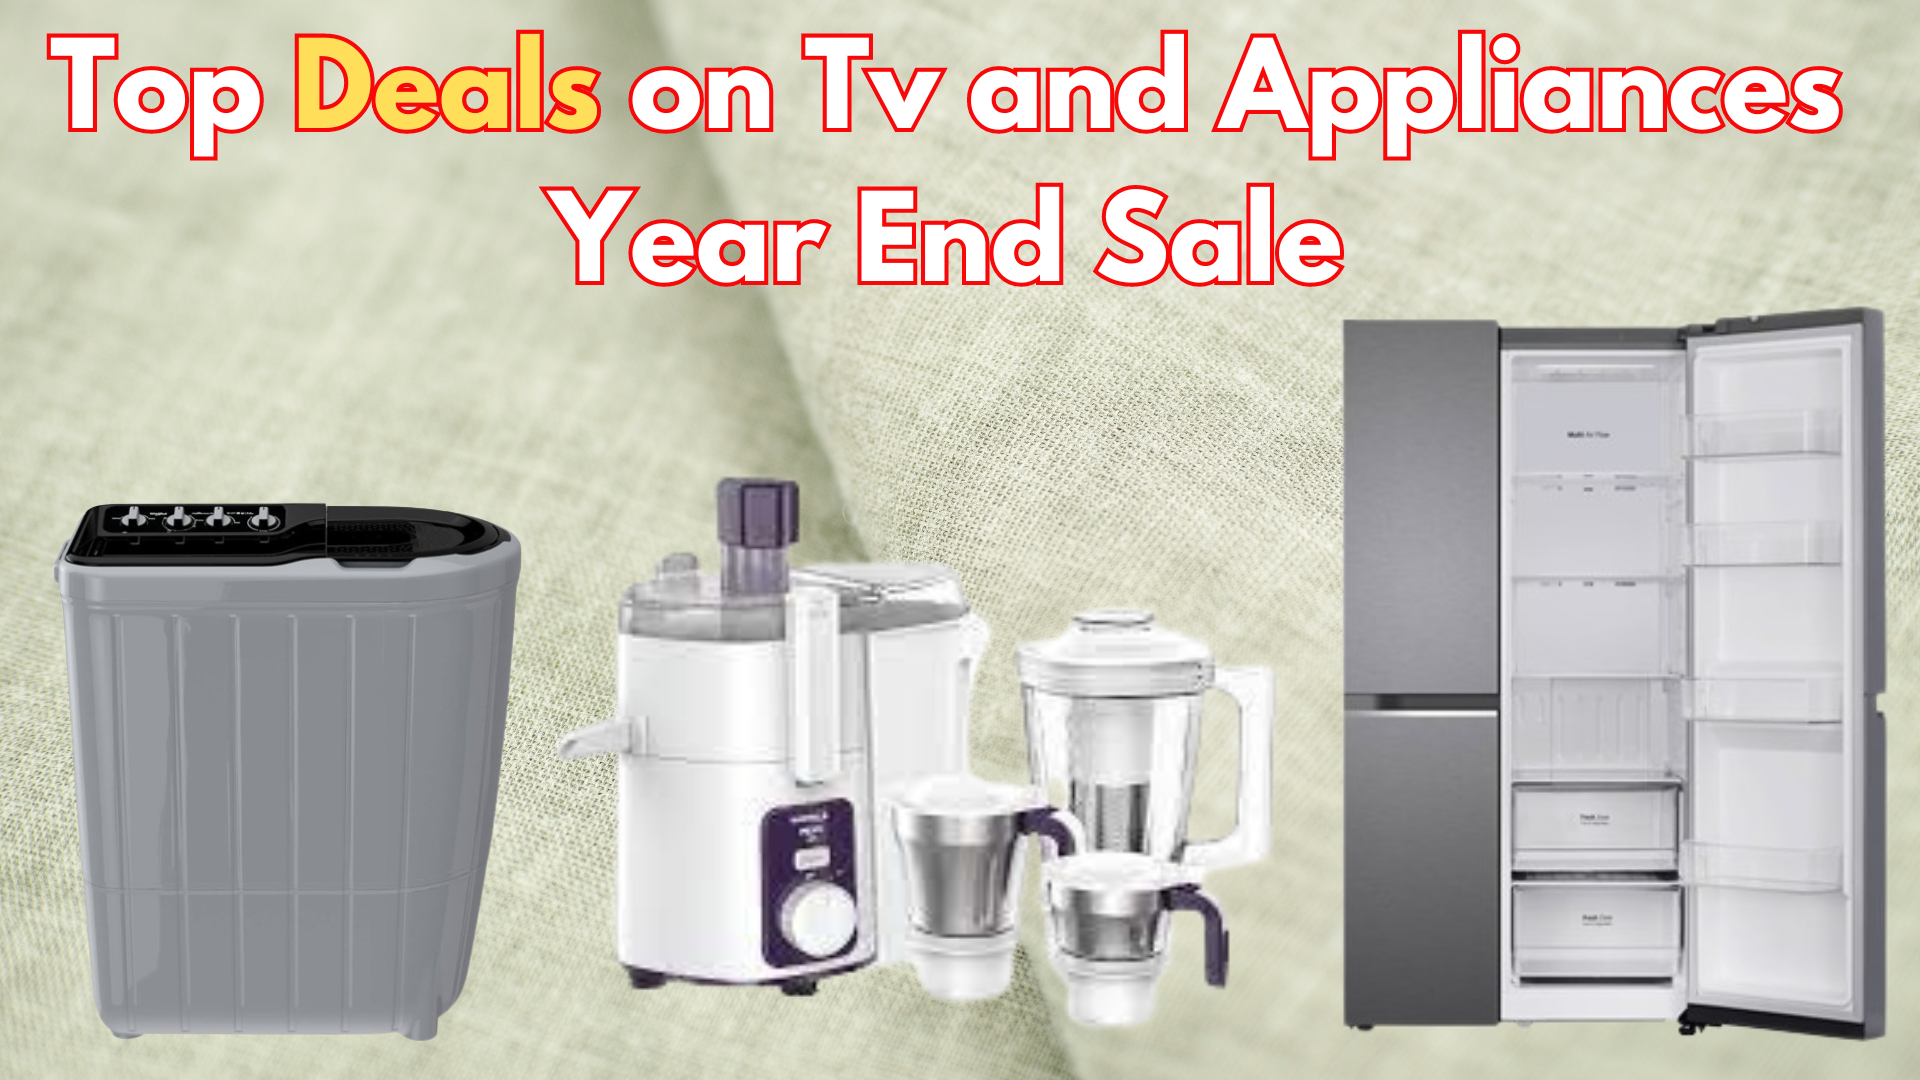 Top Deals on Tv and Appliances Year End Sale